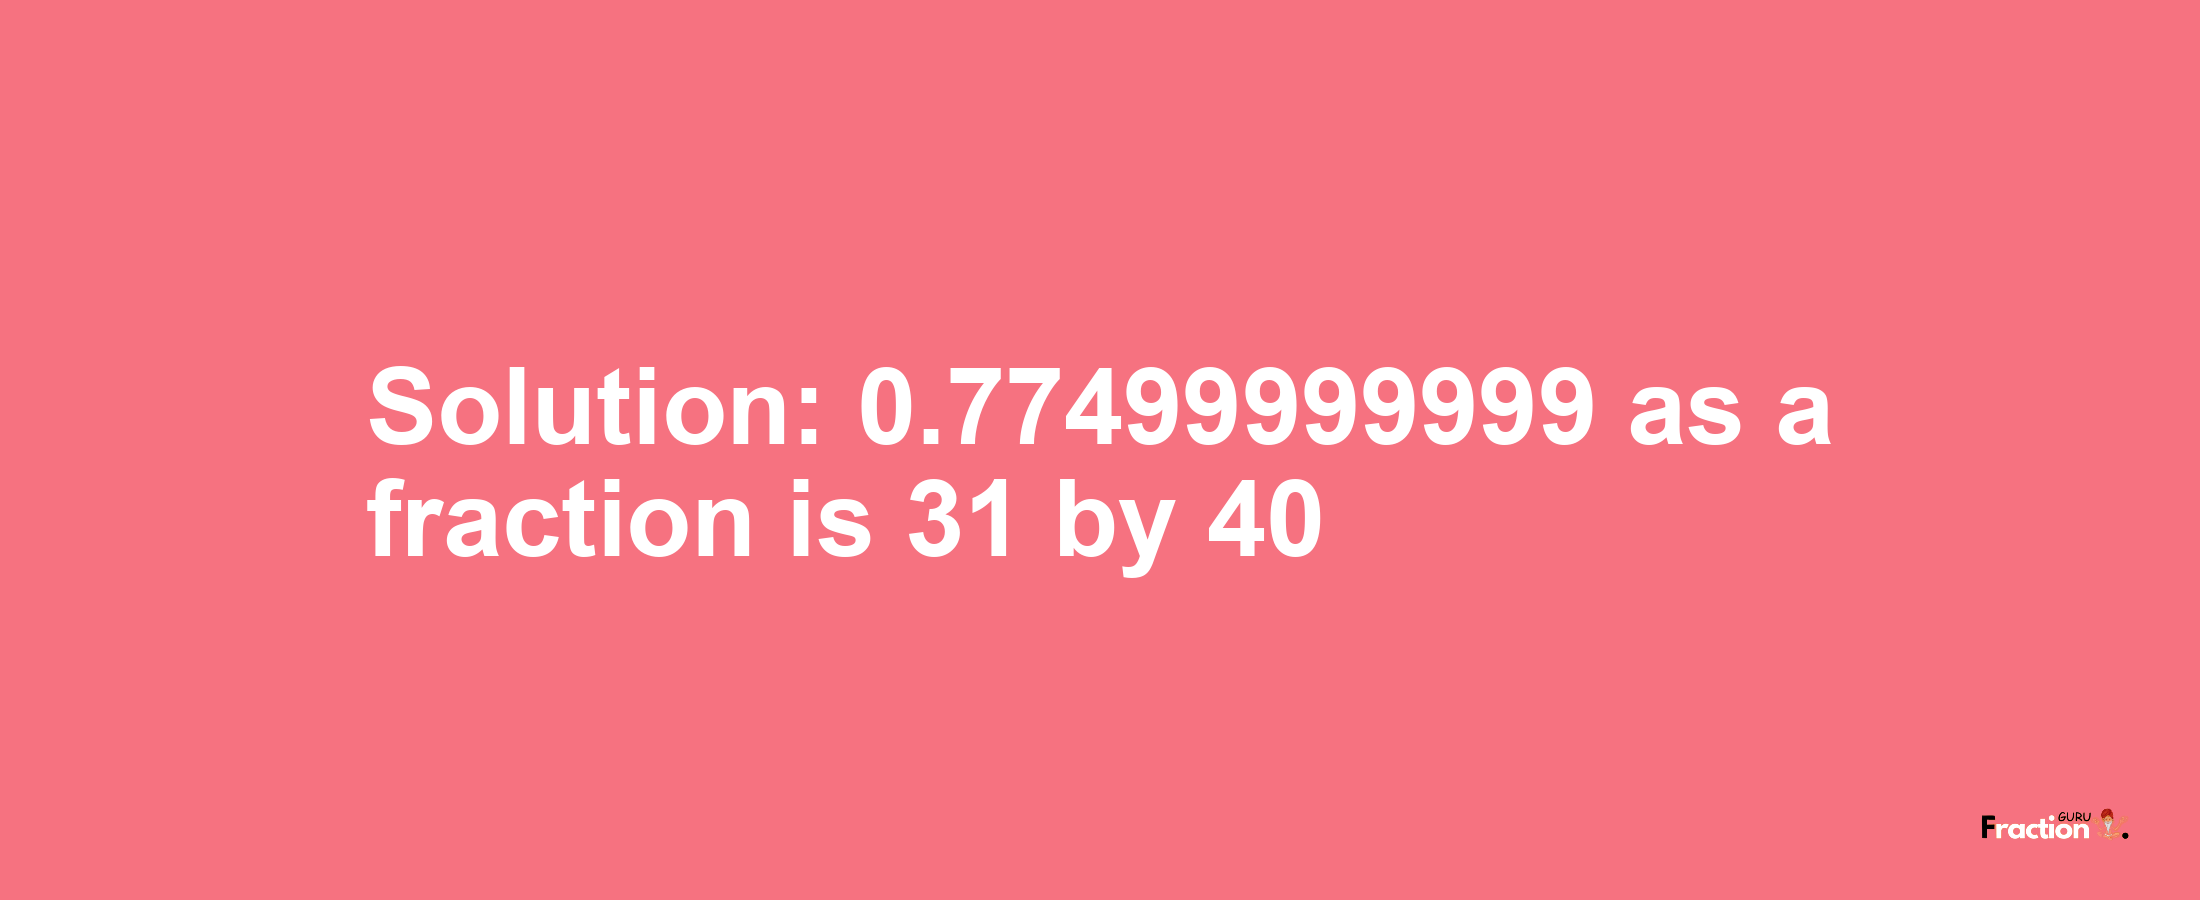 Solution:0.77499999999 as a fraction is 31/40